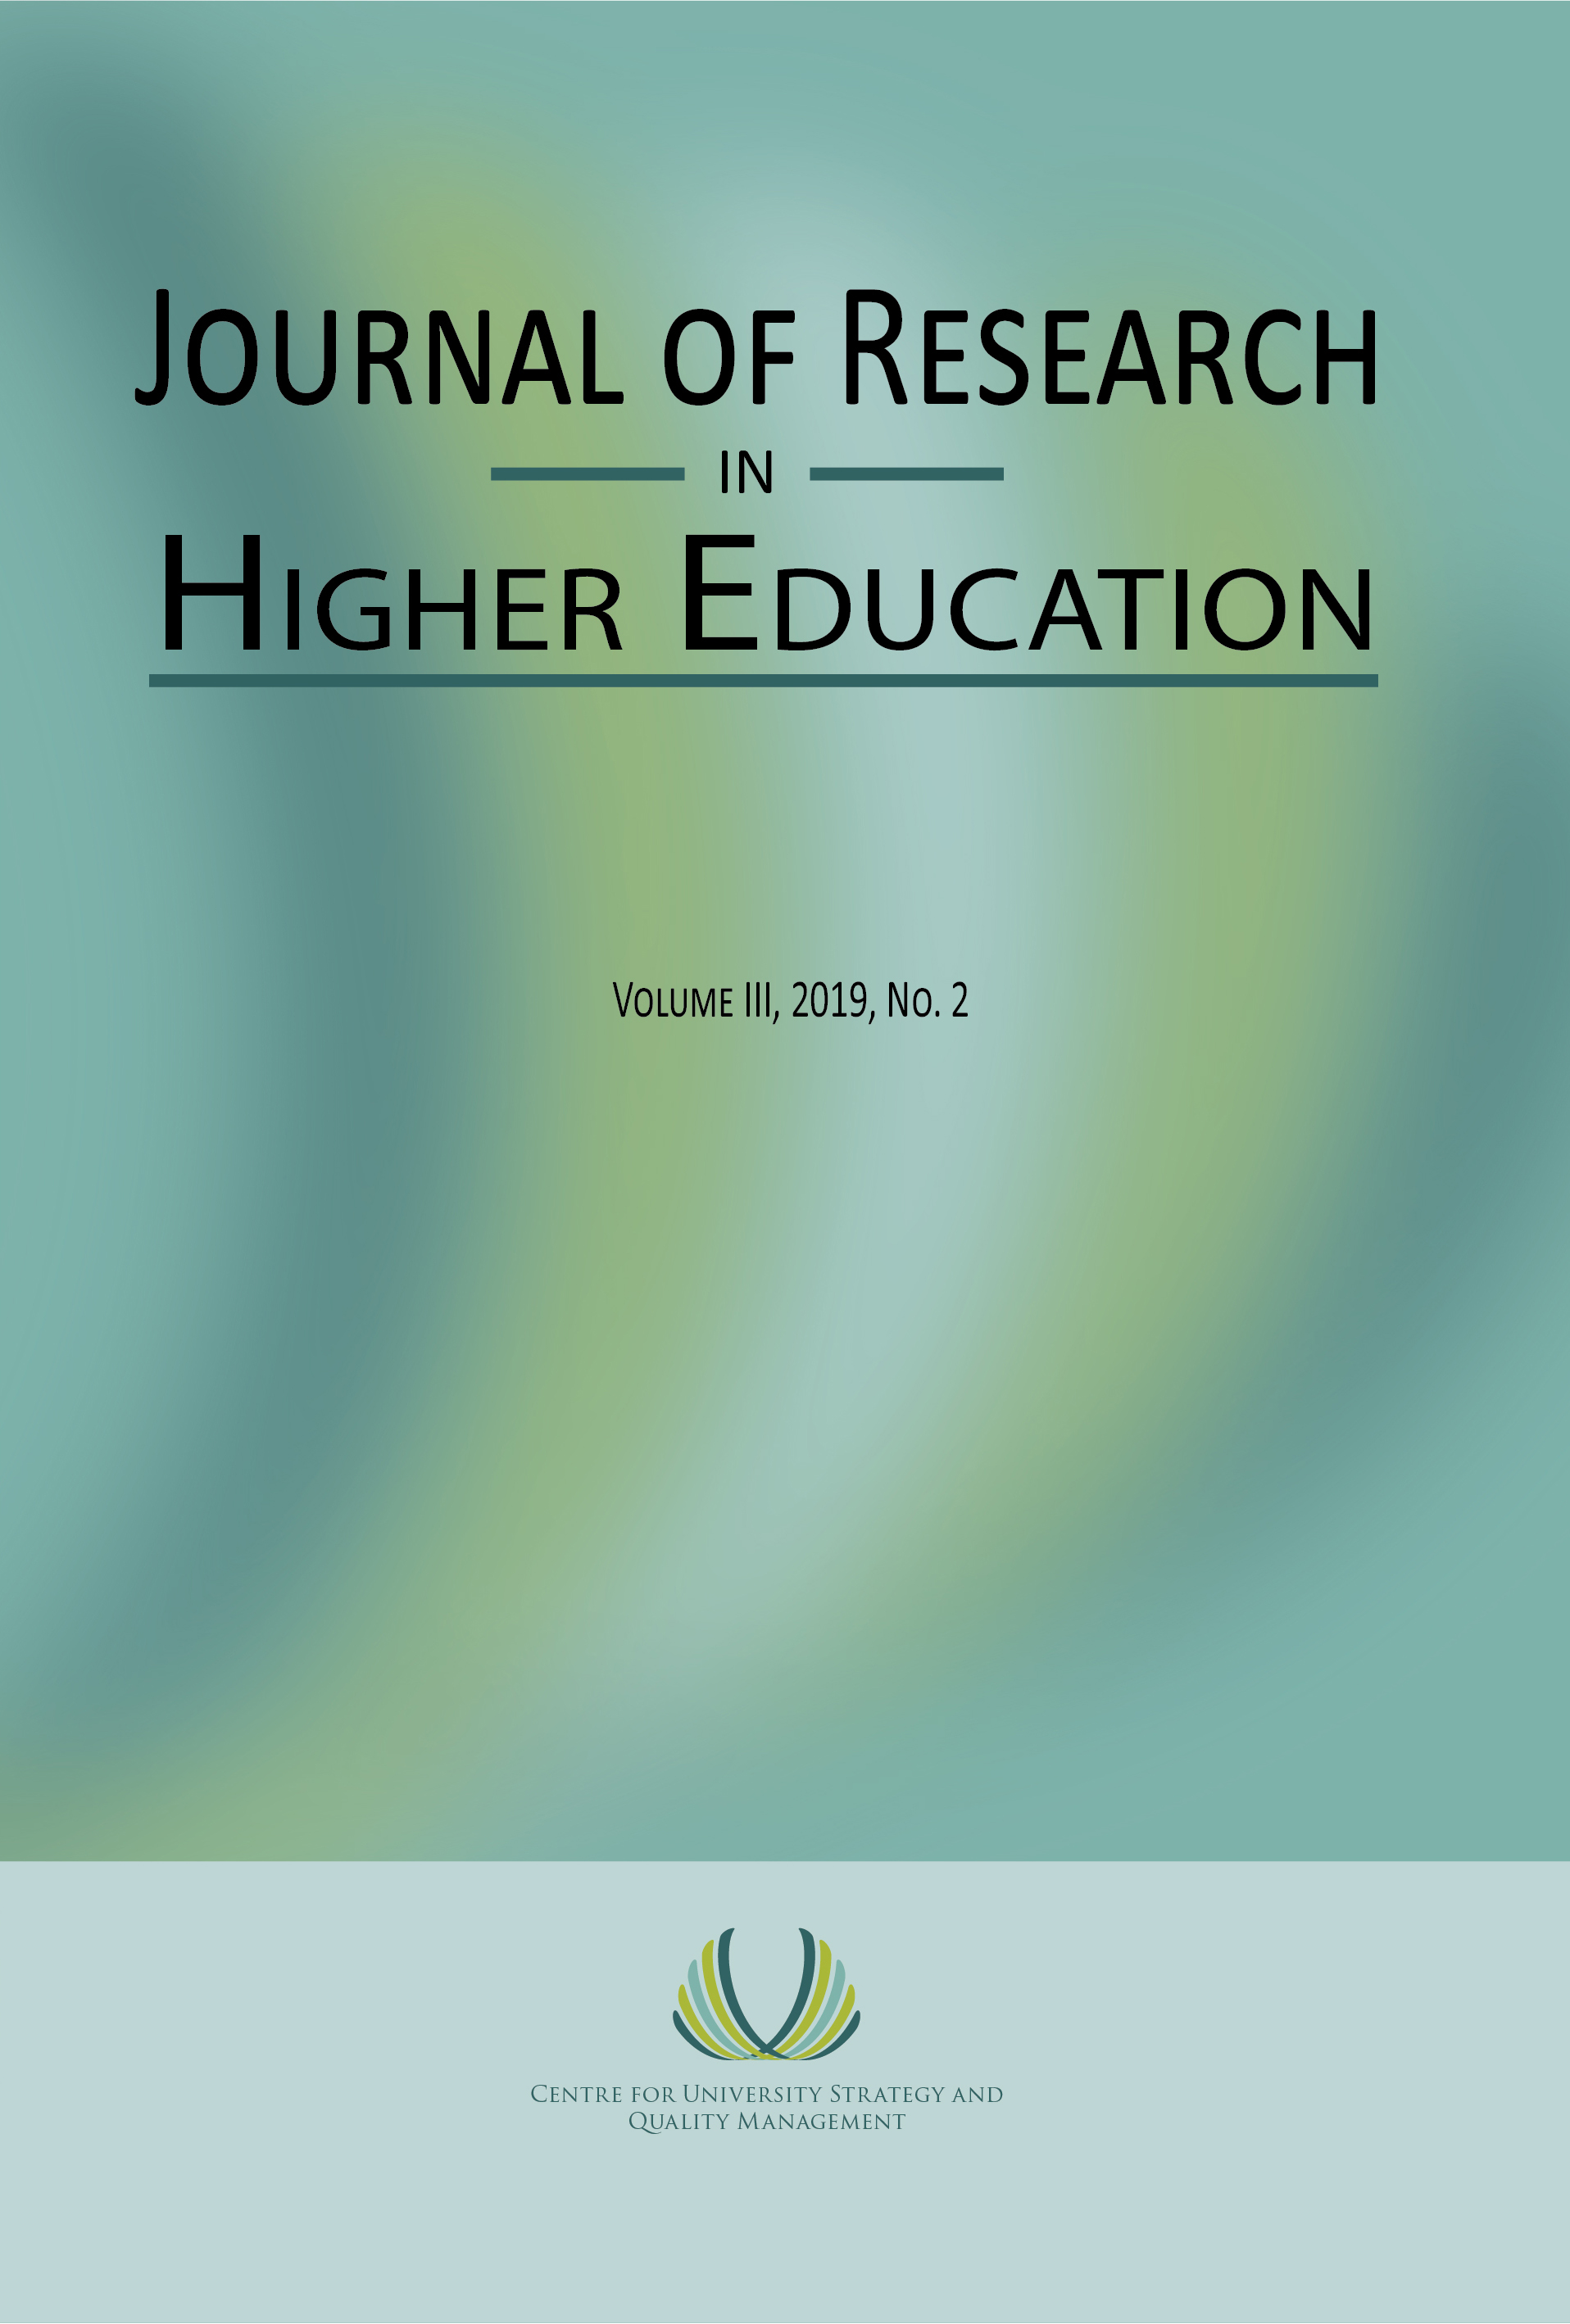 A Conceptual Modelling Study for a Learning Management System in Doctoral Schools